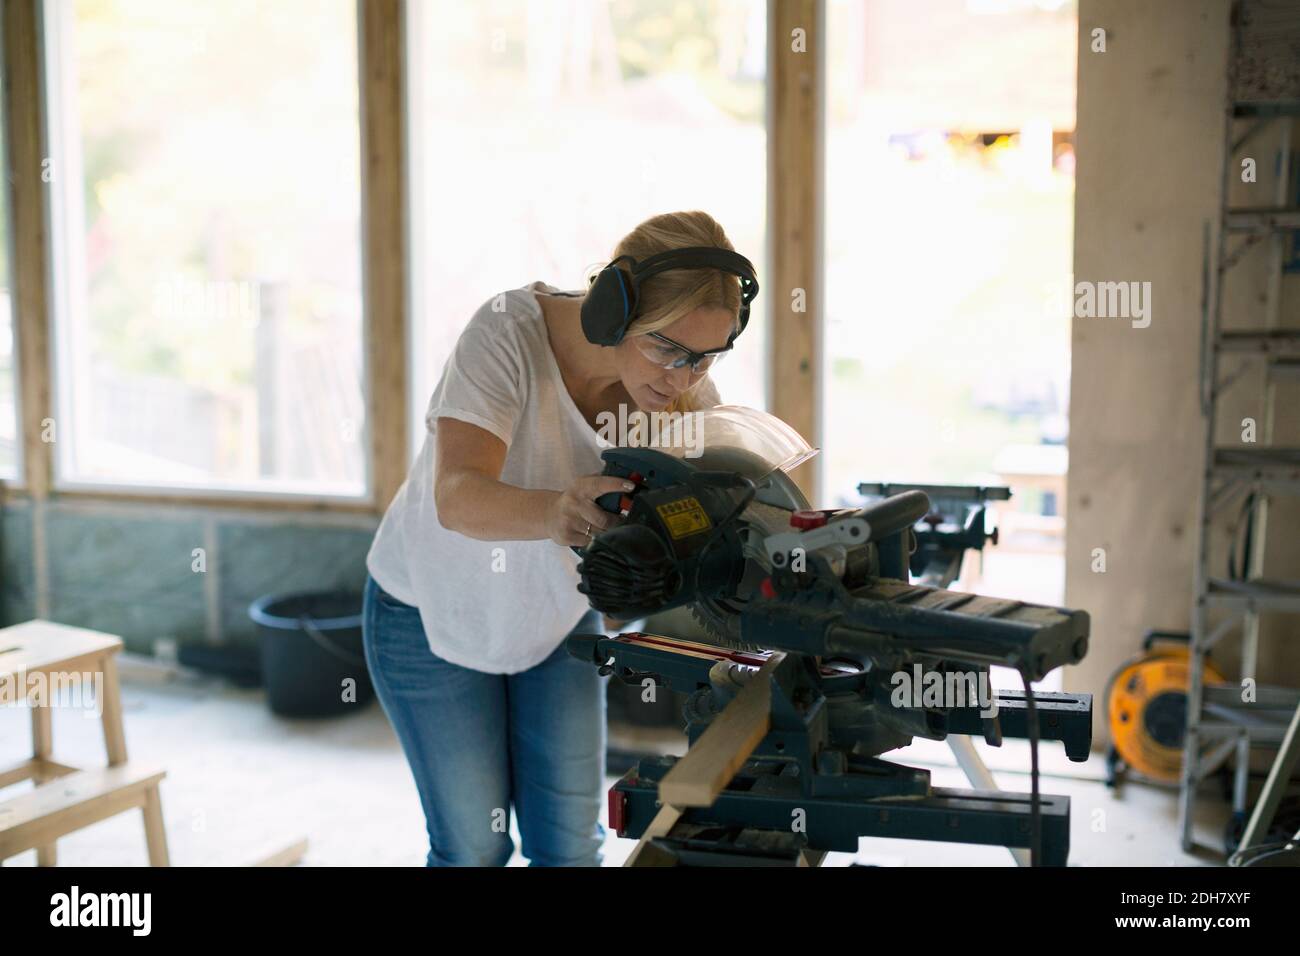 Woman cutting wood with circular saw during home improvement Stock Photo